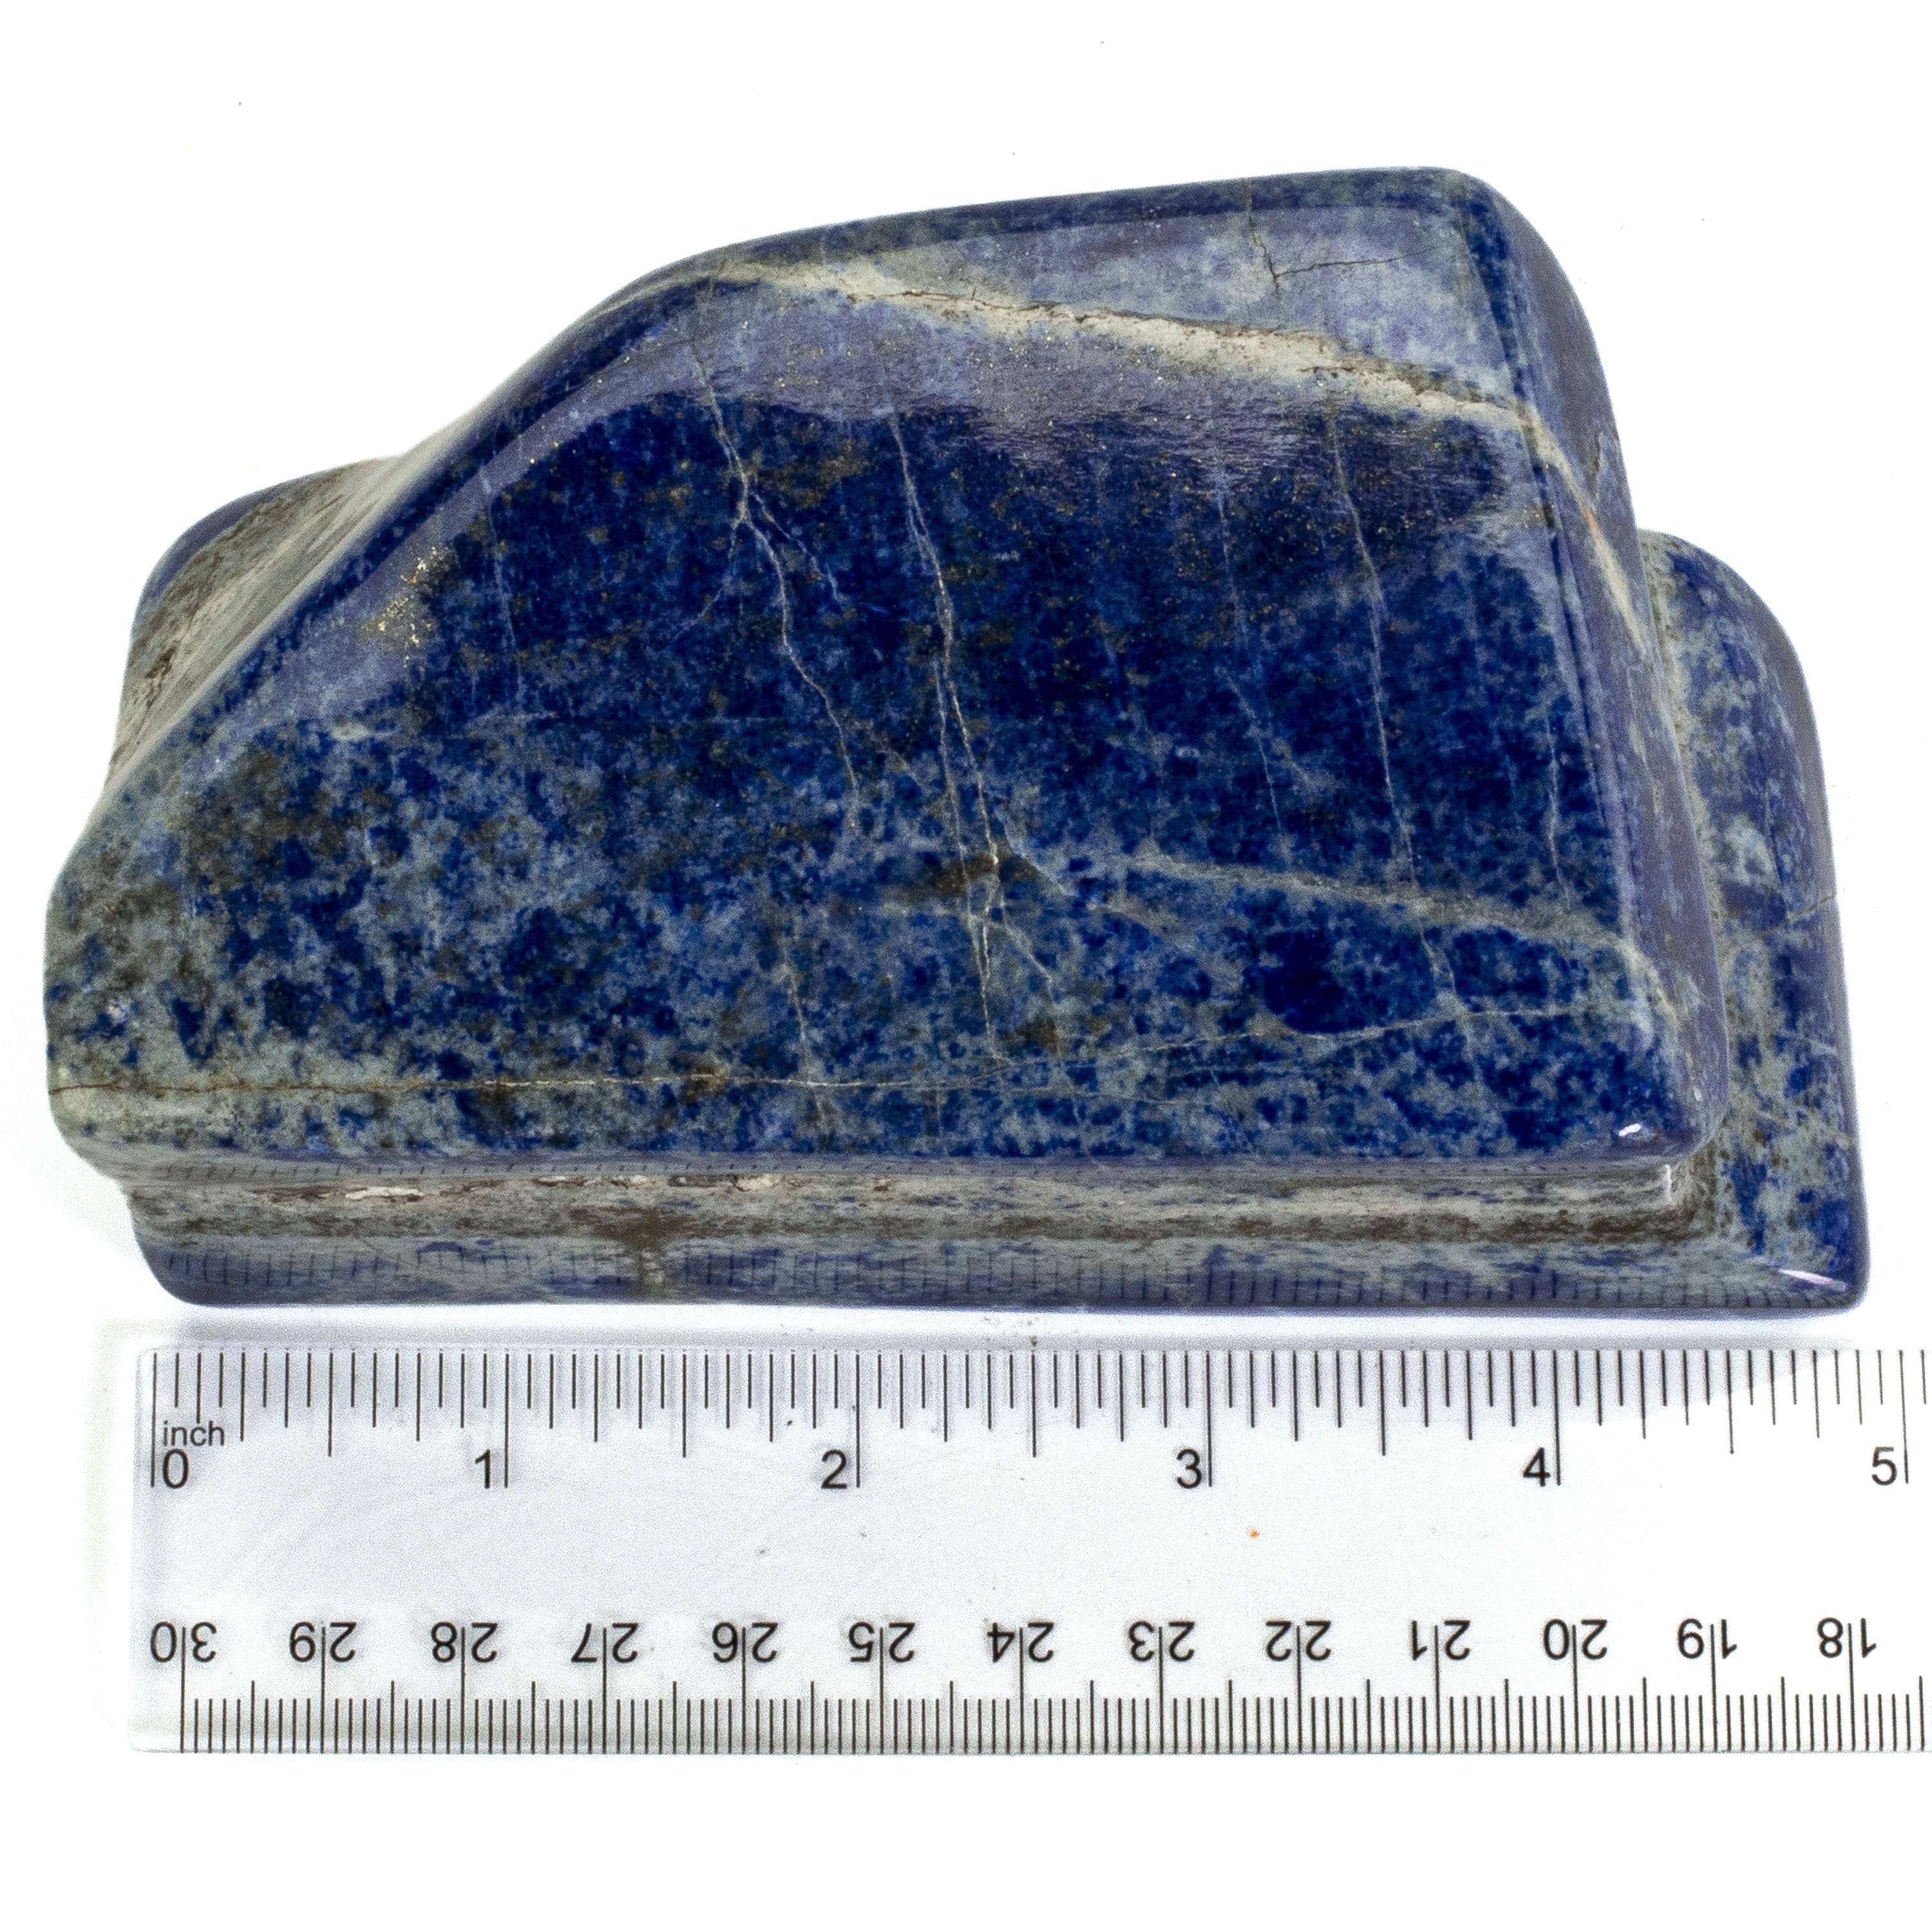 Kalifano Lapis Lapis Lazuil Freeform from Afghanistan - 1.2 kg / 2.6 lbs LP1300.004